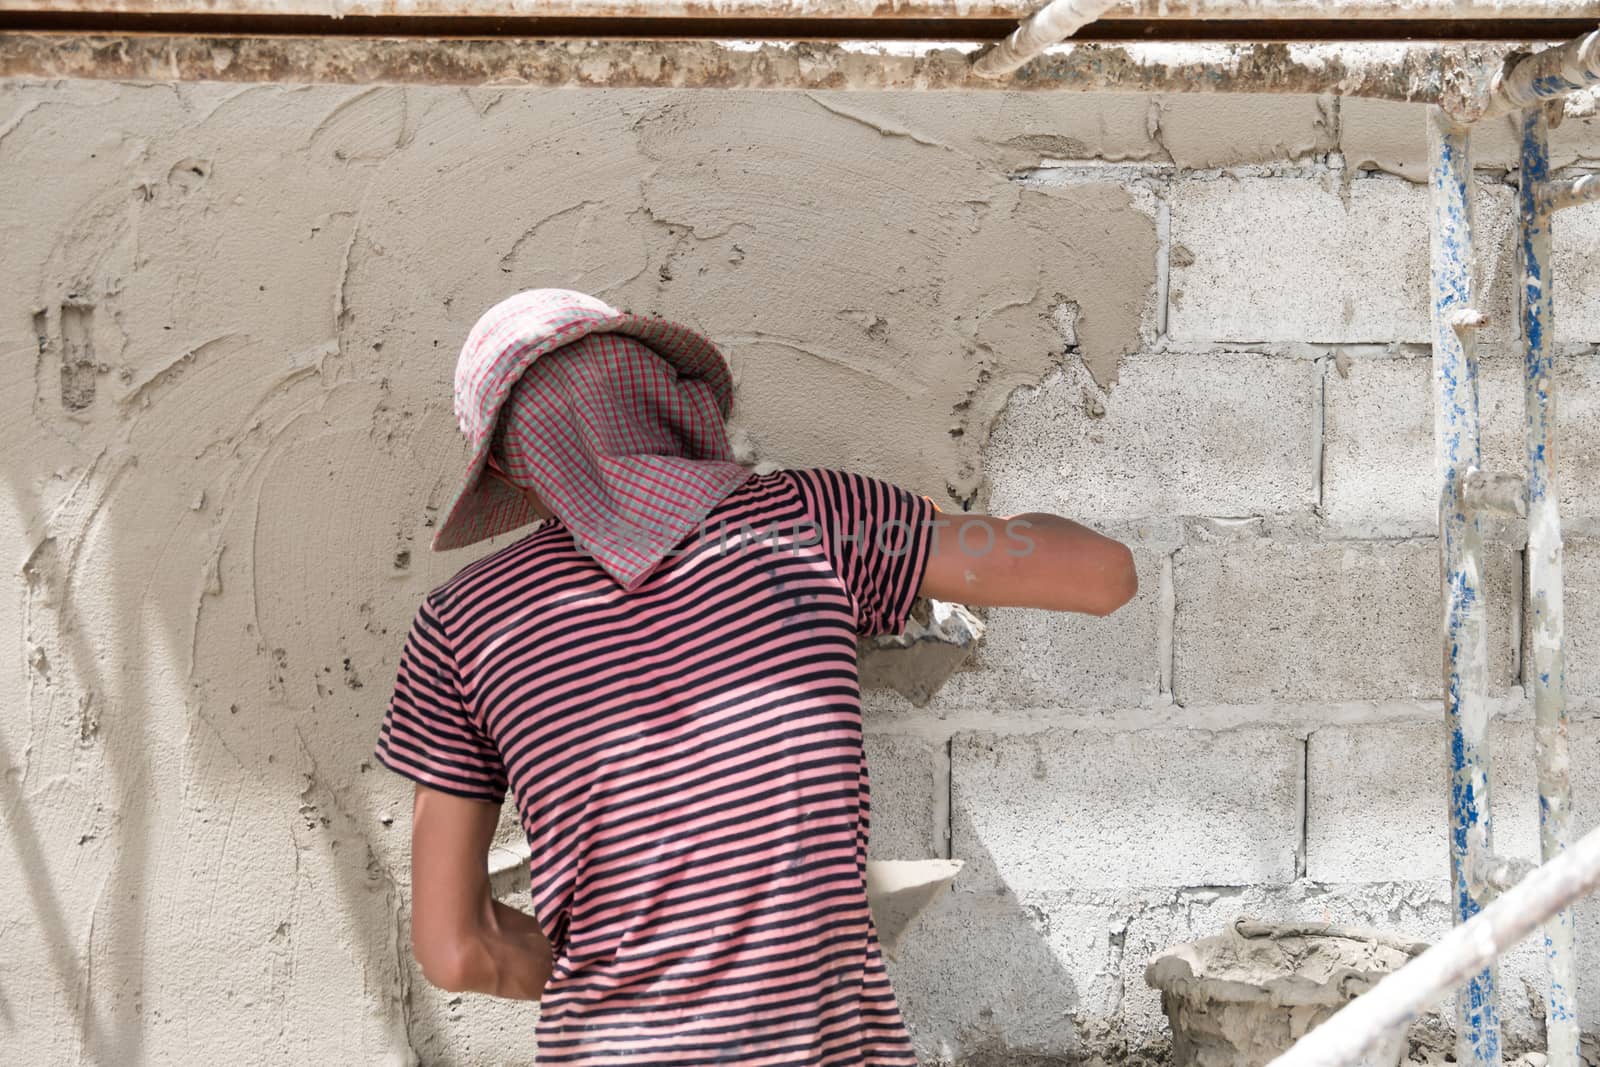 Close up of industrial bricklayer installing cement on construction site